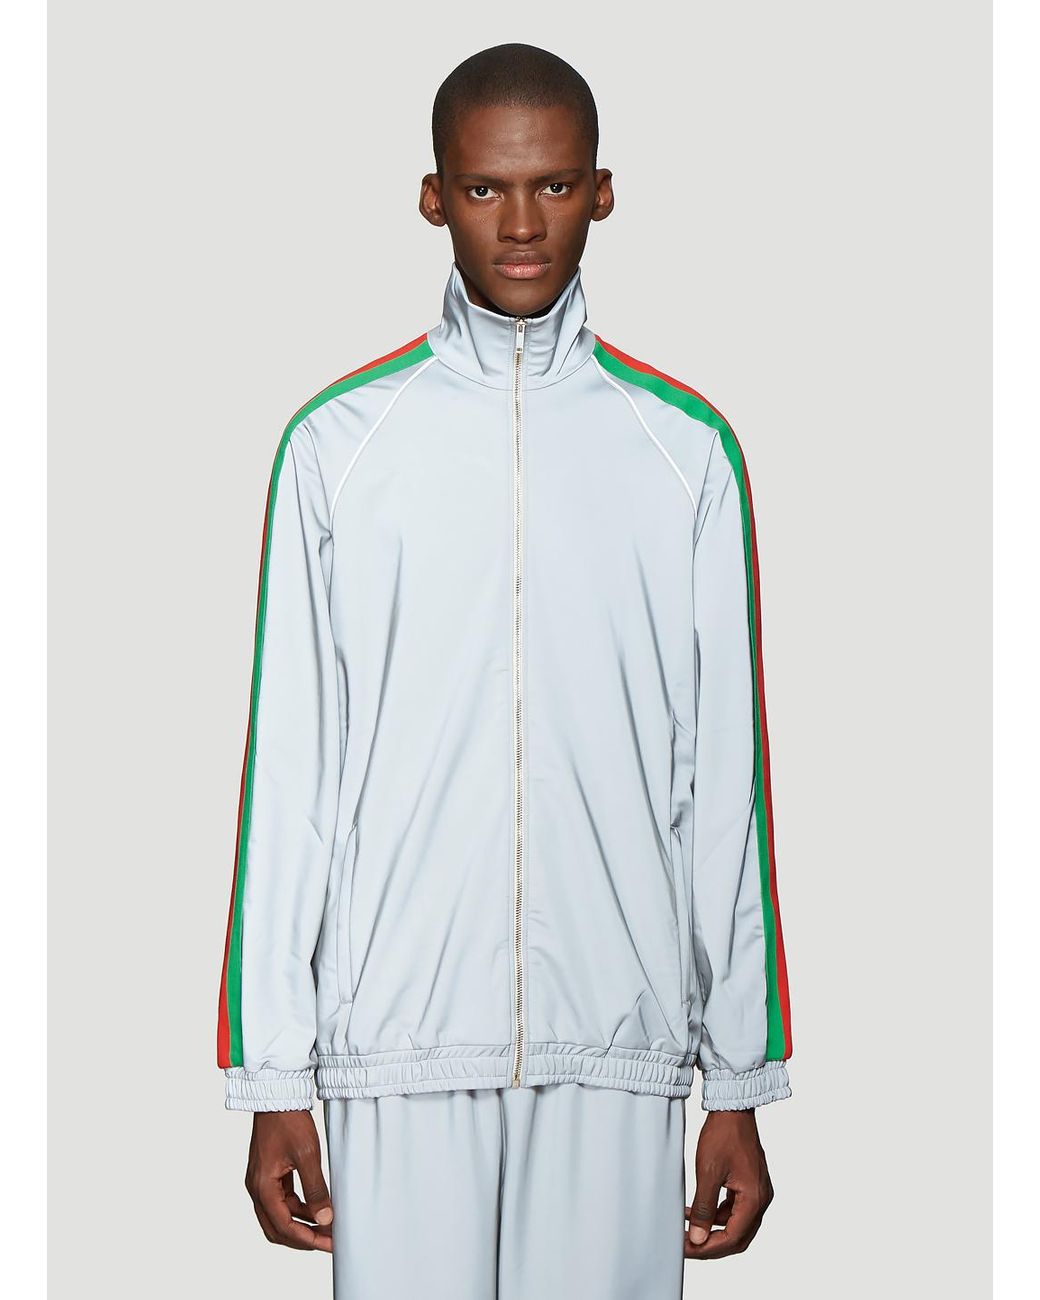 Gucci Synthetic Reflective Track Jacket In Grey in Gray for Men - Lyst